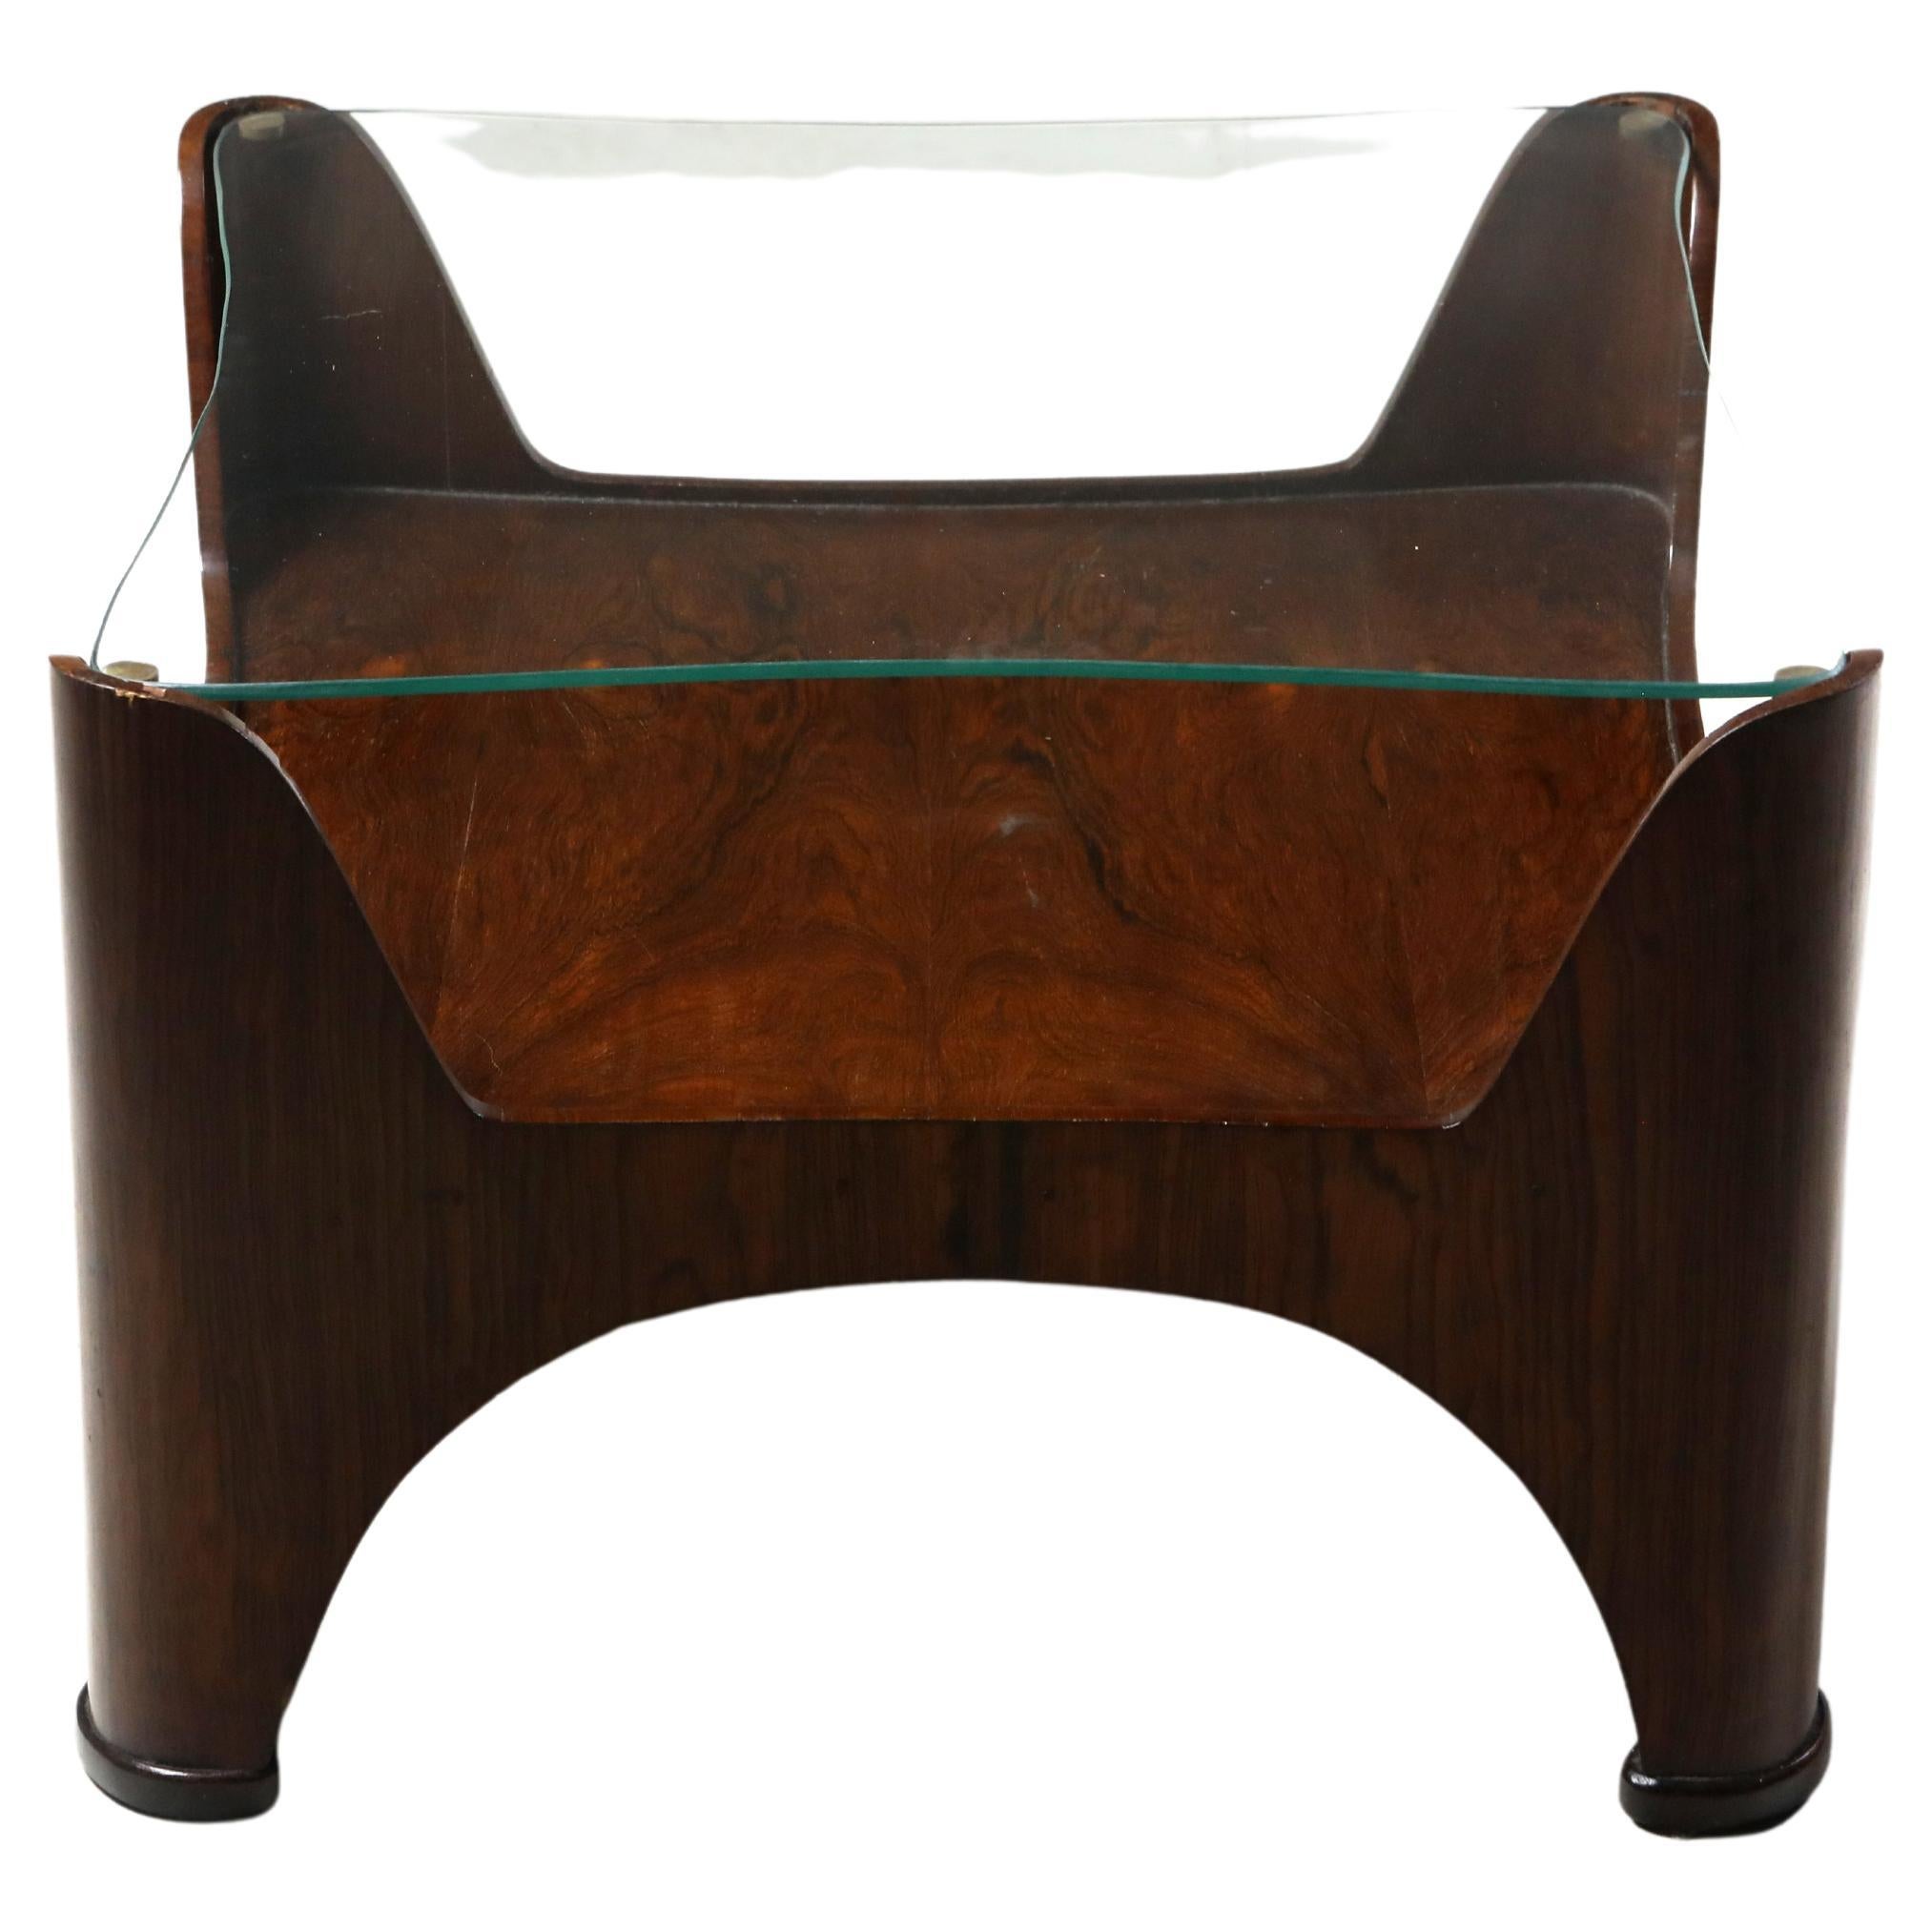 Mid-Century Modern Square Glass-Top Hardwood End Table, Brazil, 1960s For Sale